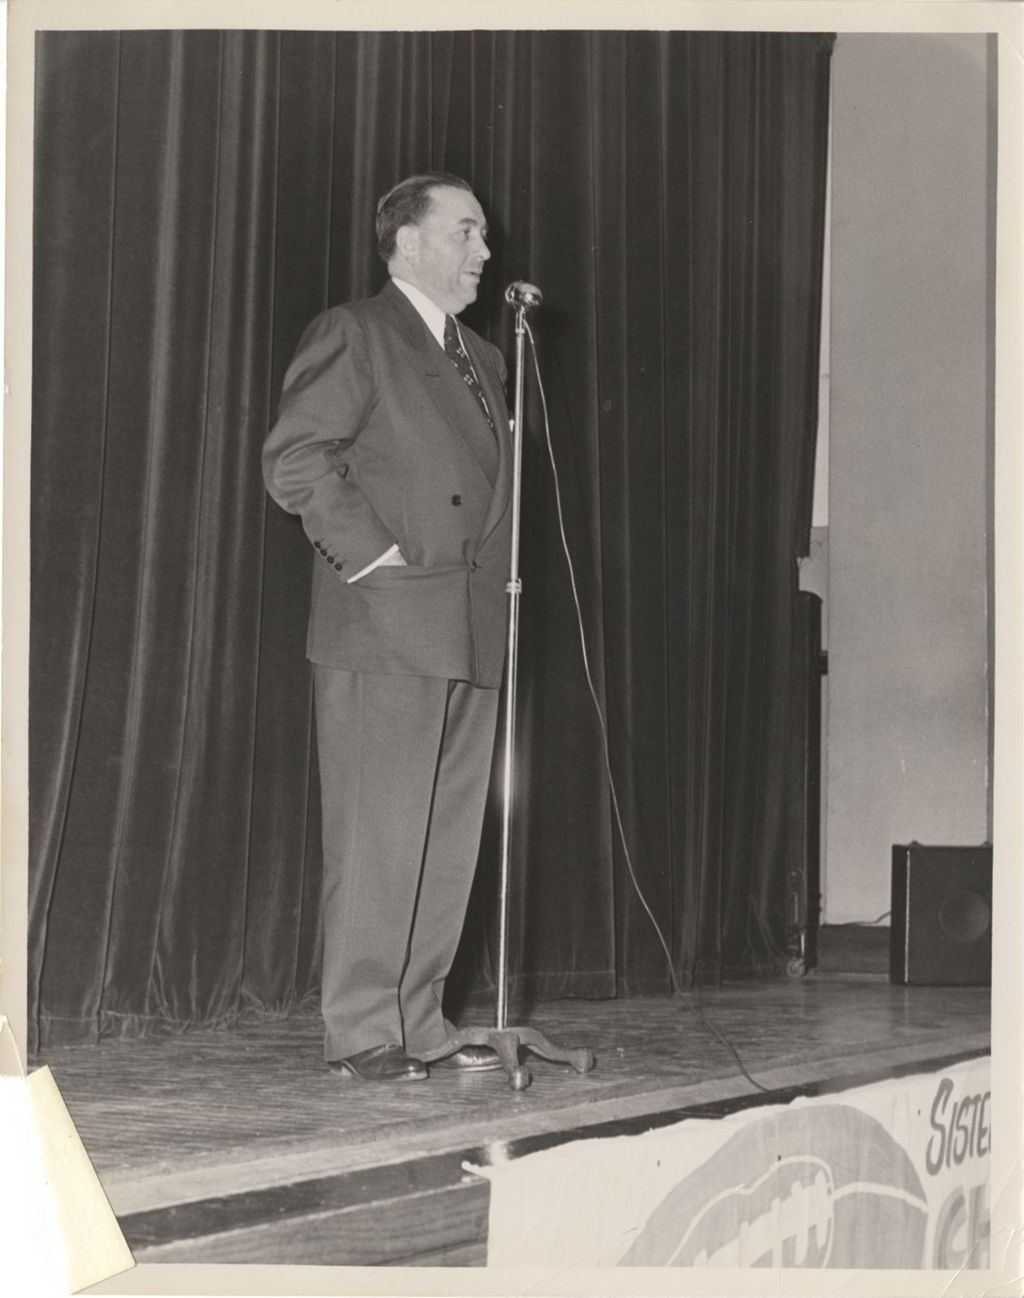 Miniature of Richard J. Daley speaking from a stage